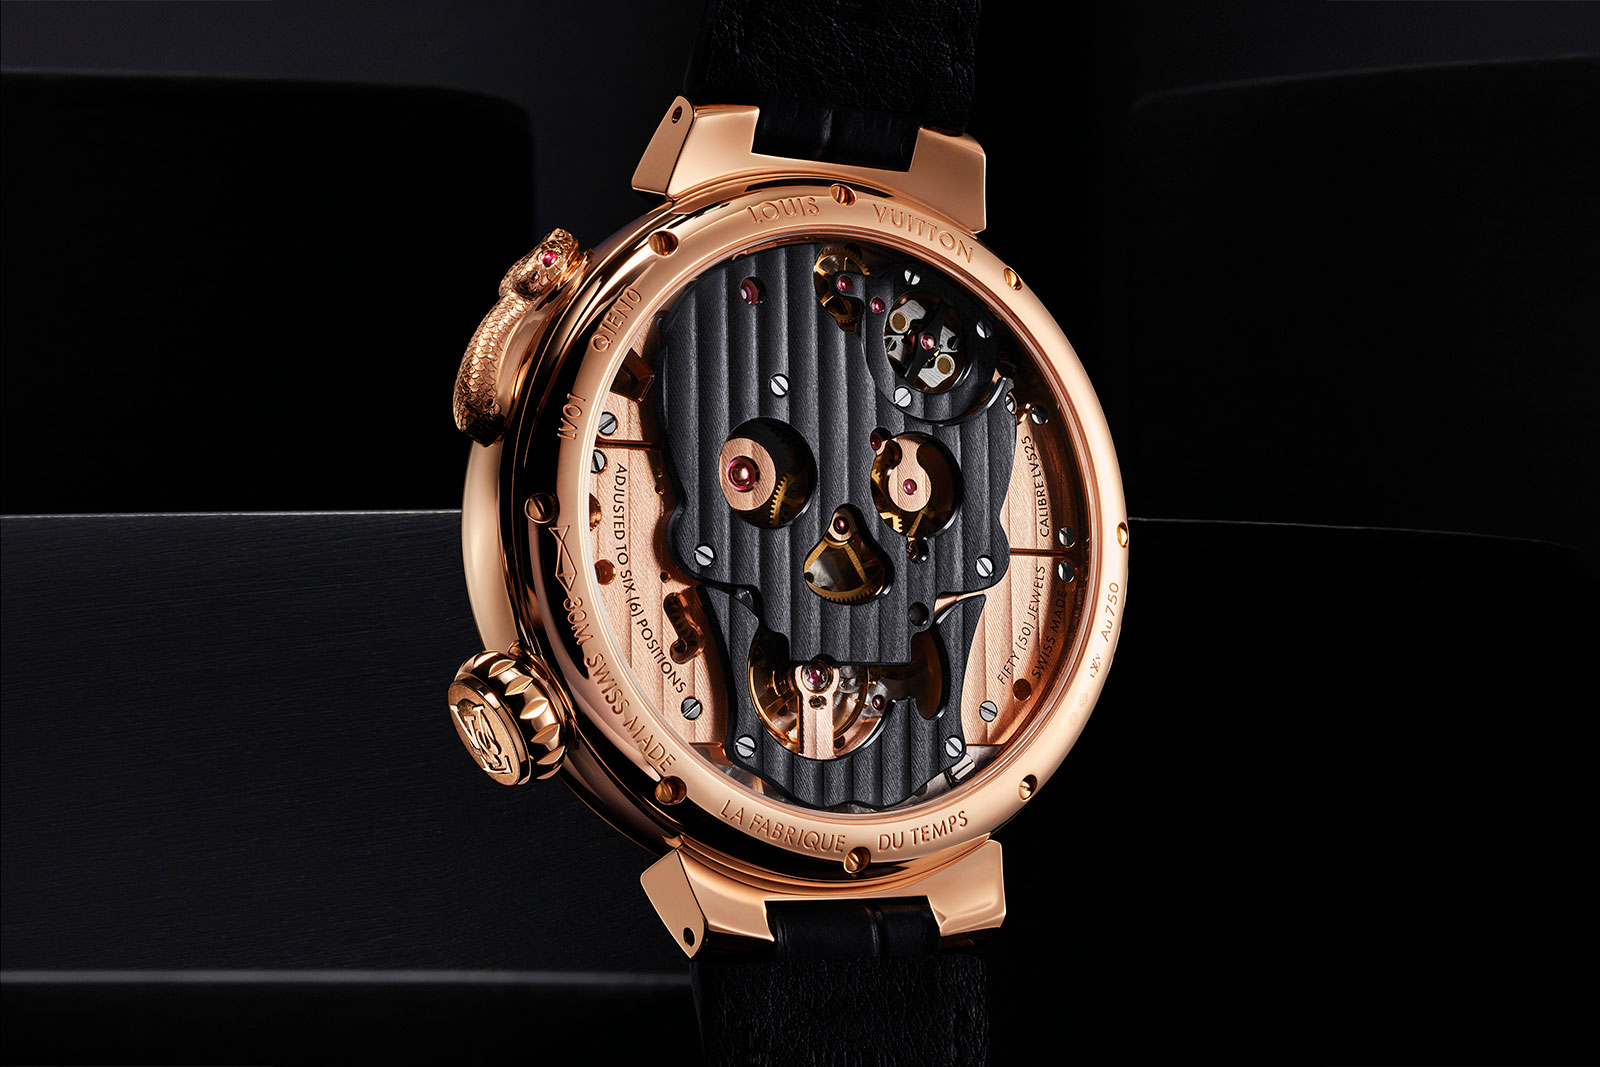 Introducing The Louis Vuitton Tambour Carpe Diem Automaton Minute Repeater  Watch –  – Featuring Watch Reviews, Critiques, Reports & News